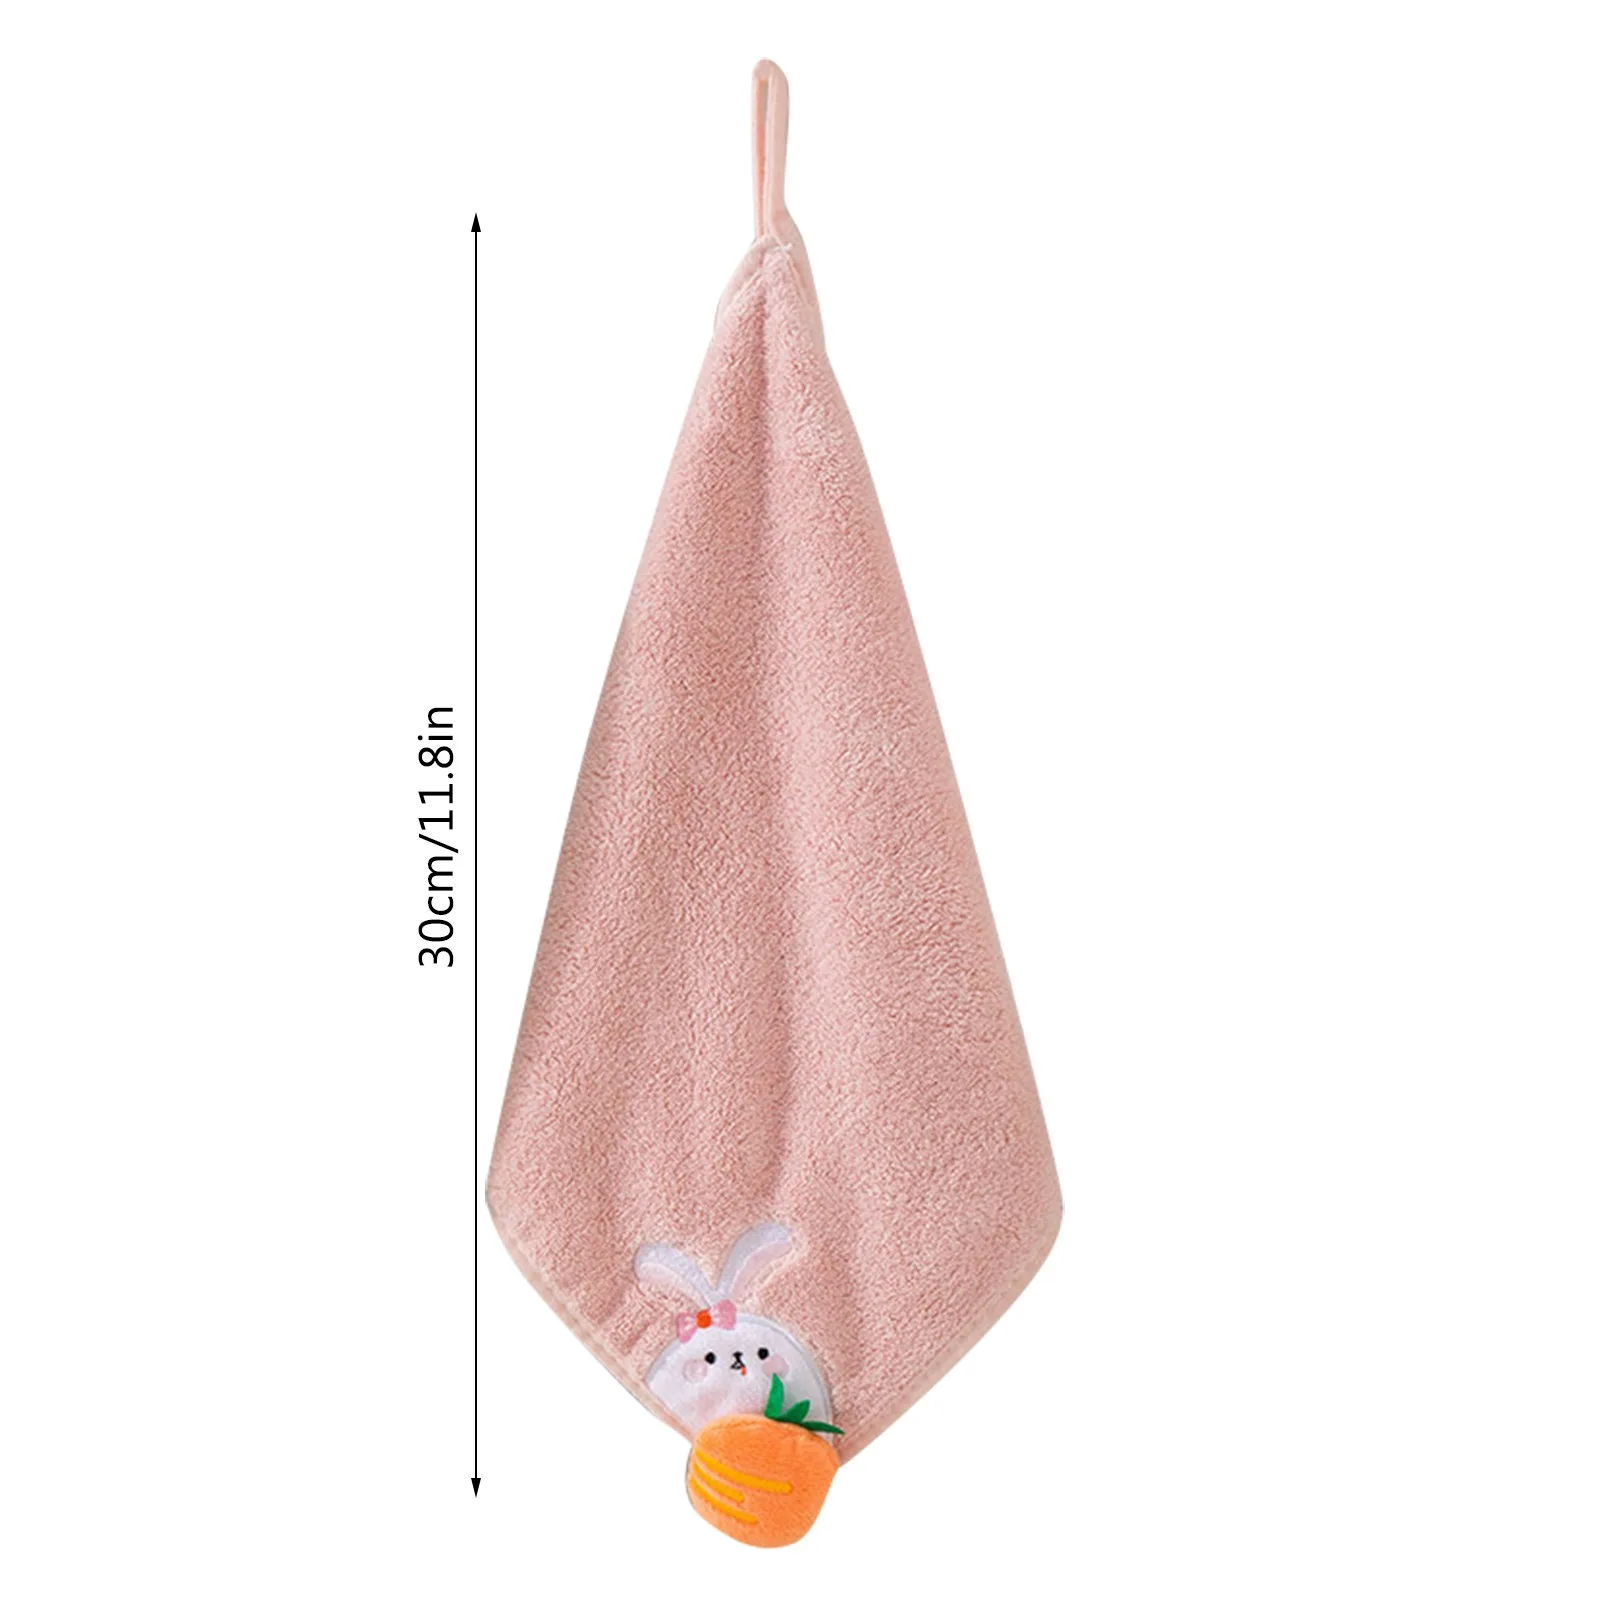 1PC Cartoon Cat Hanging Hand Towels Soft Coral Velvet Cute Kids Baby Wipe  Handkerchief for Home Kitchen Quick Dry Bath Towels